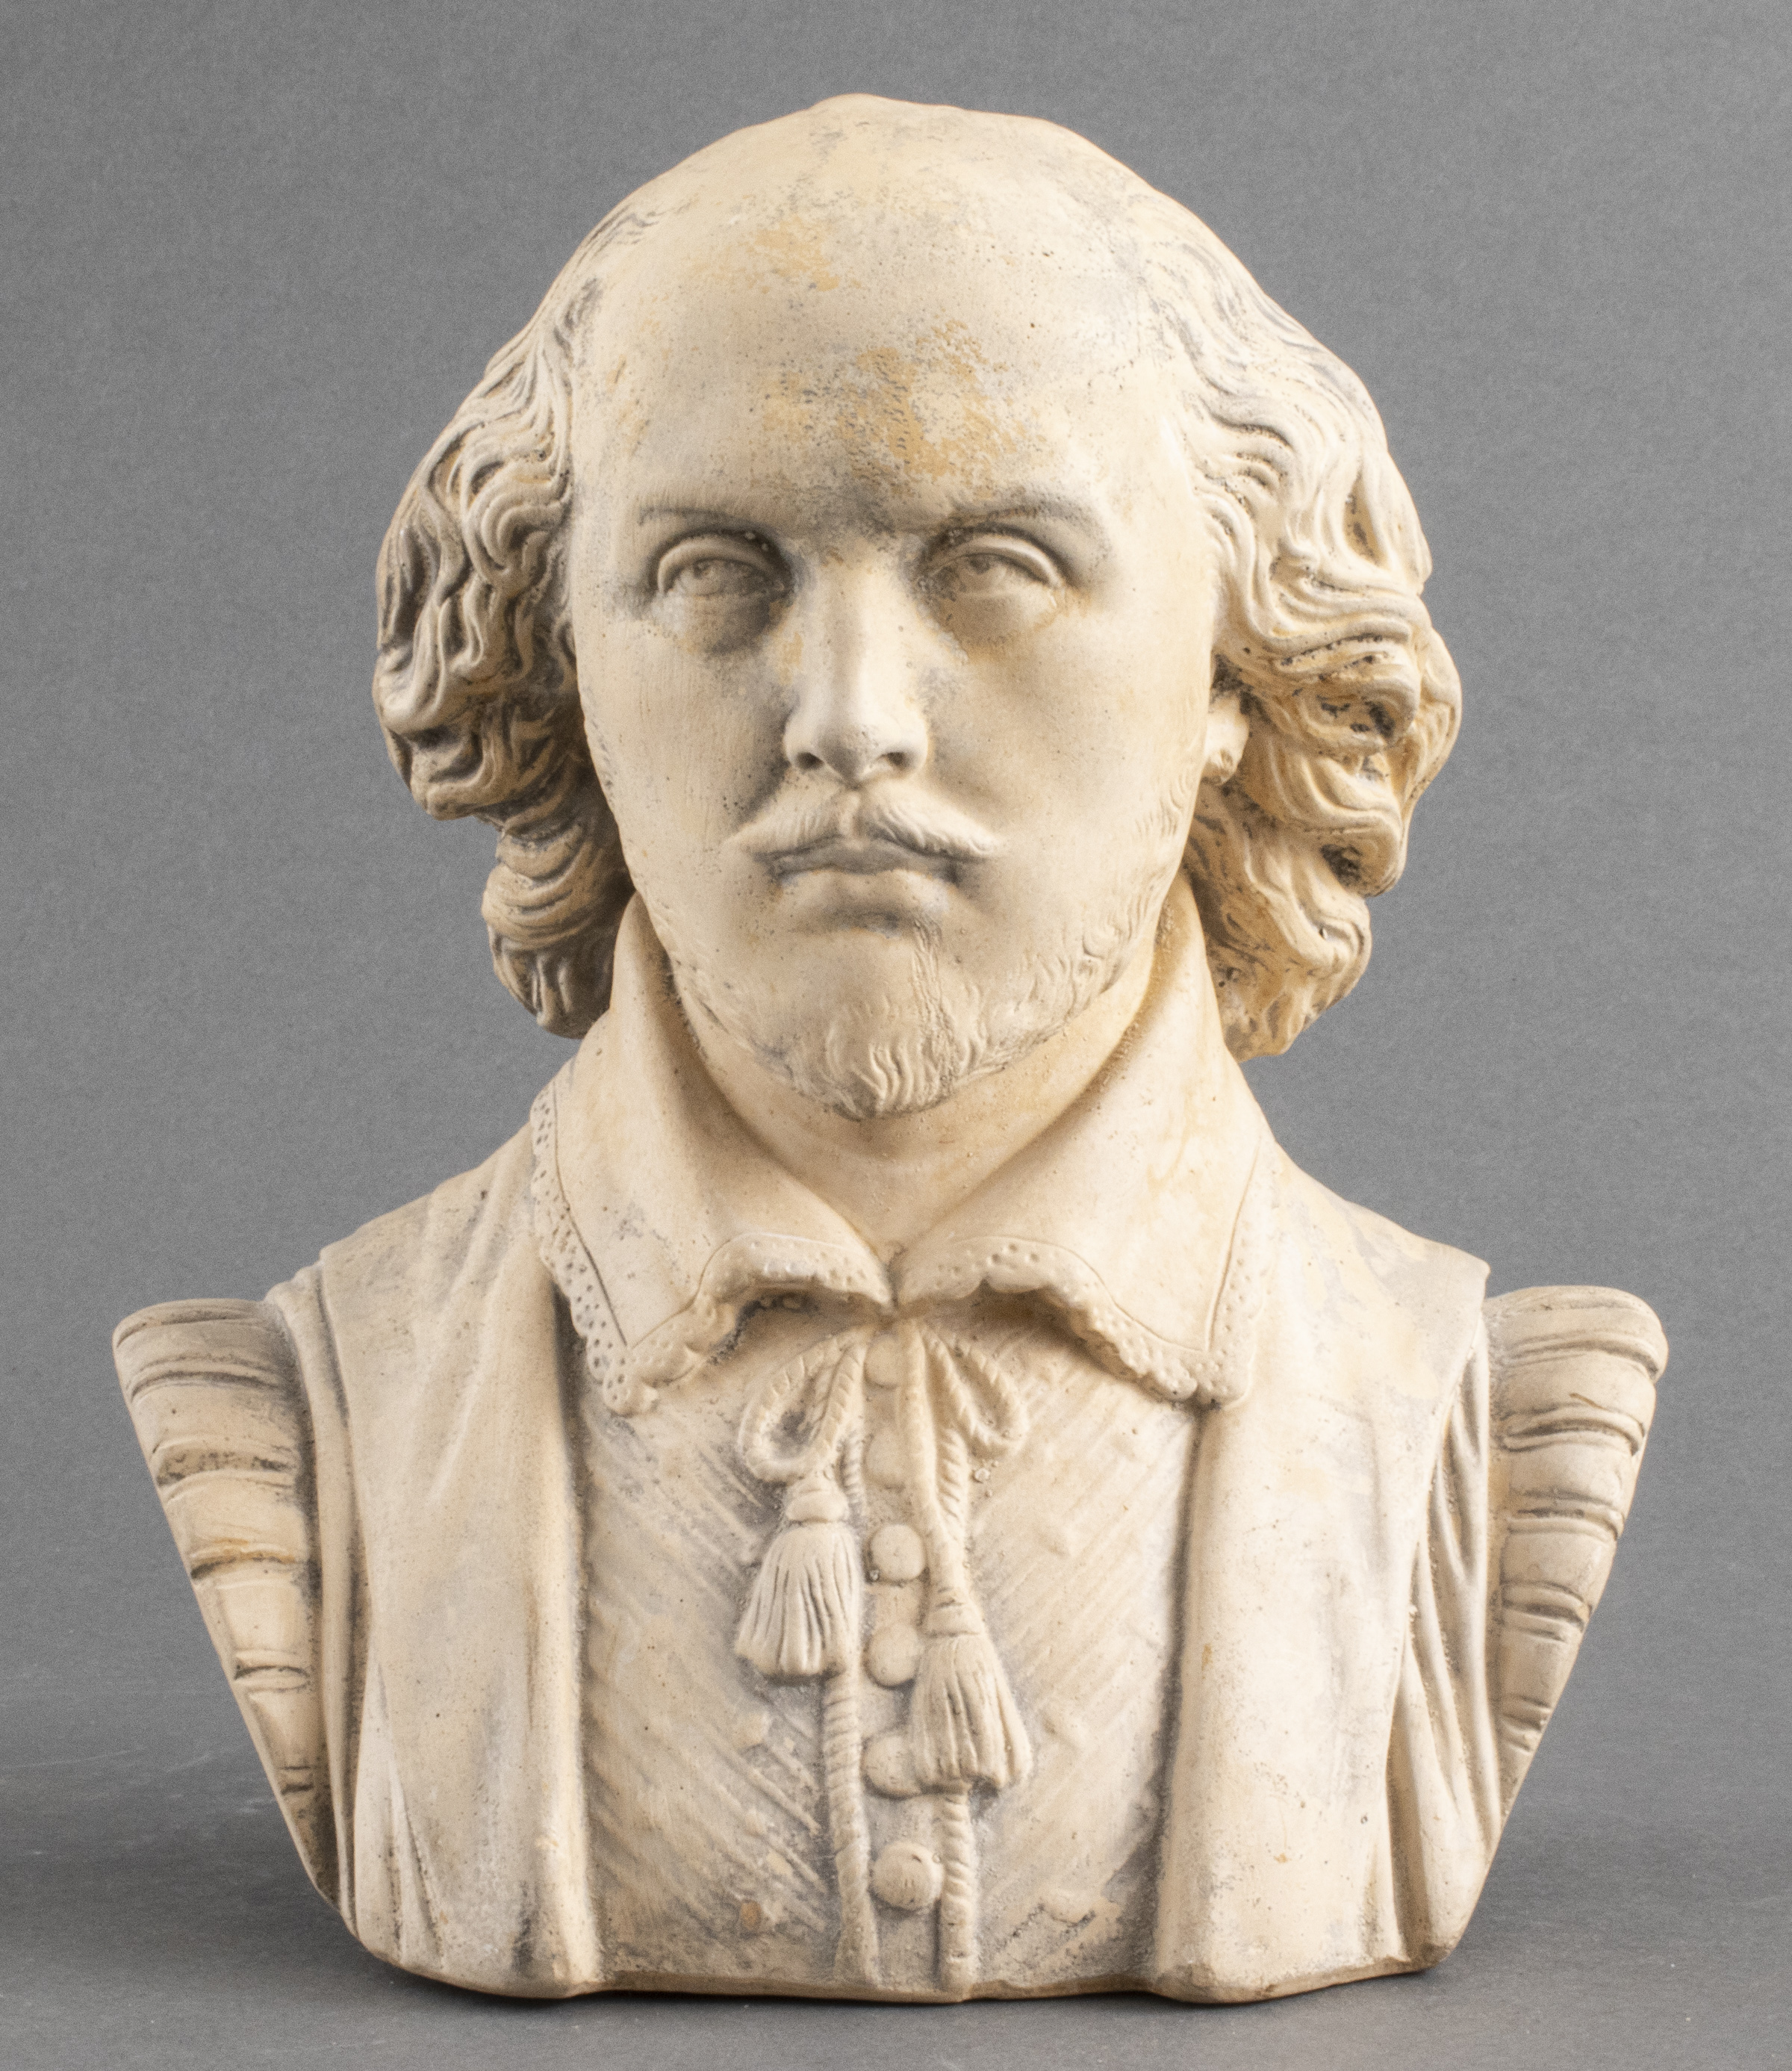 POTTERY BUST SCULPTURE OF WILLIAM